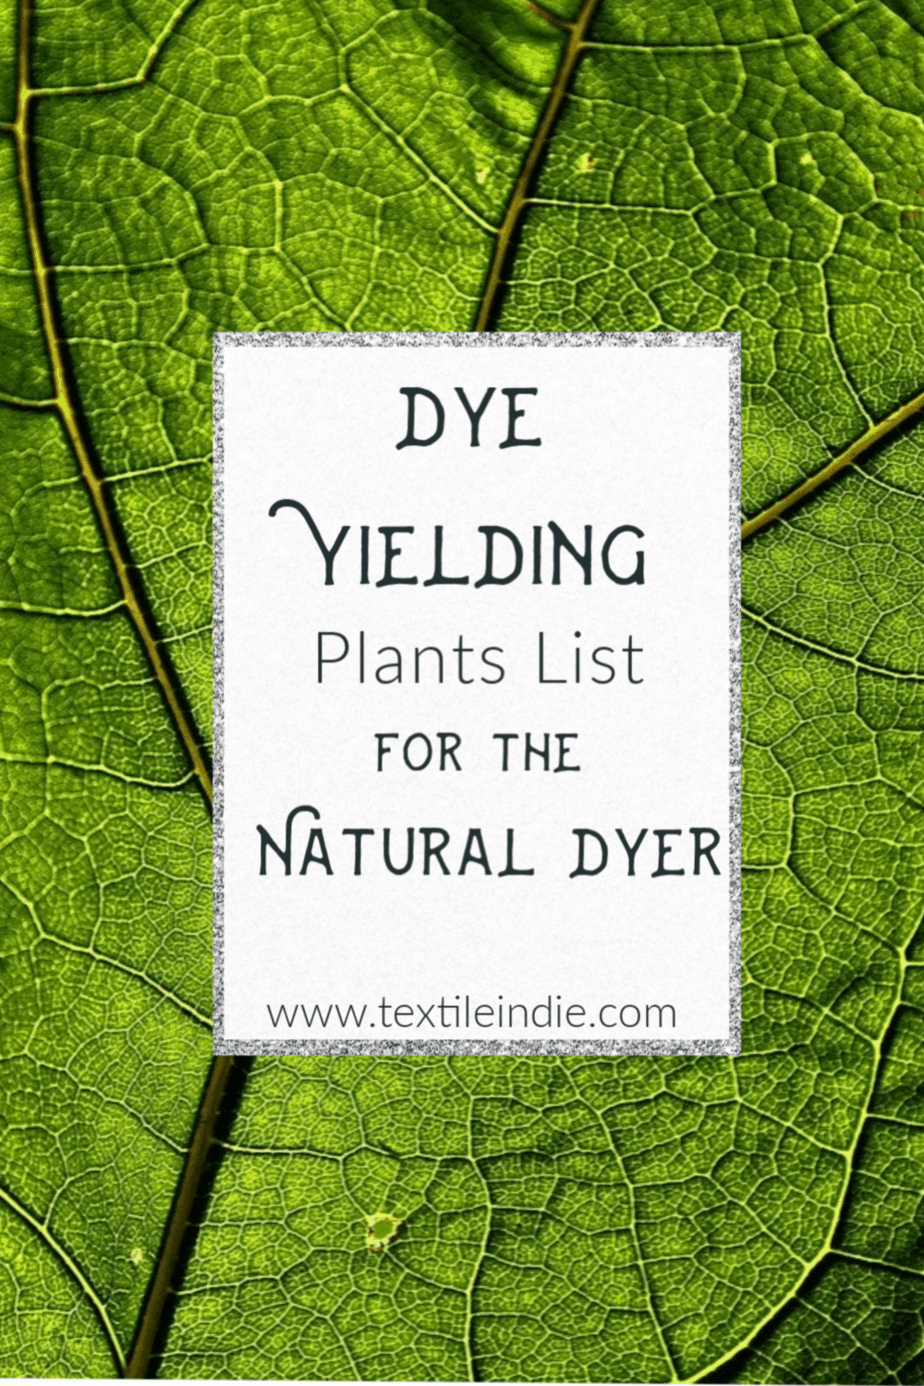 List of Dye Yielding Plants for the Natural Dyer